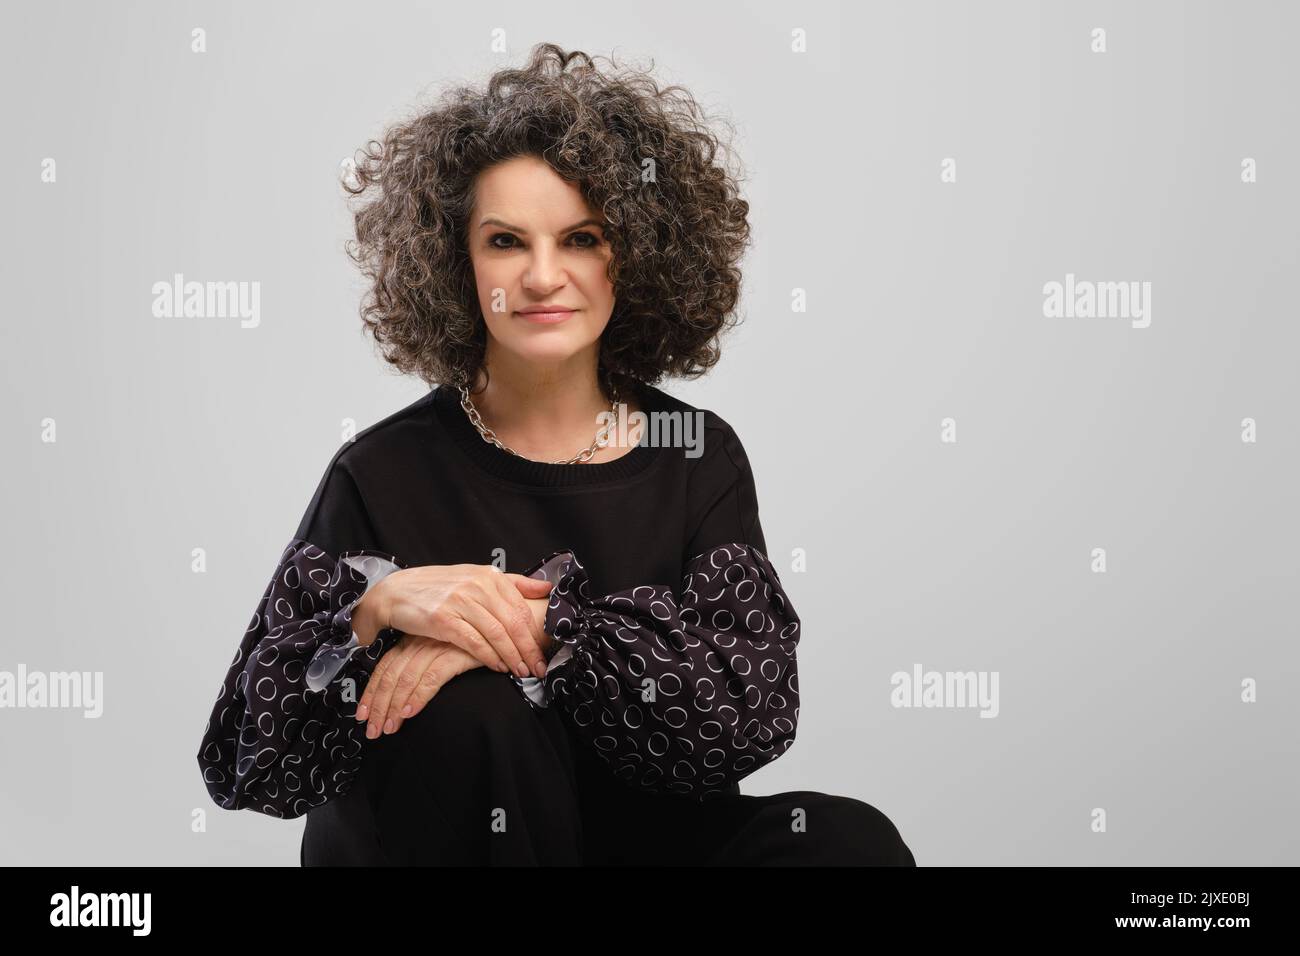 Portrait of senior woman with lush curly hair and black pantsuit posing in studio over grey background Stock Photo